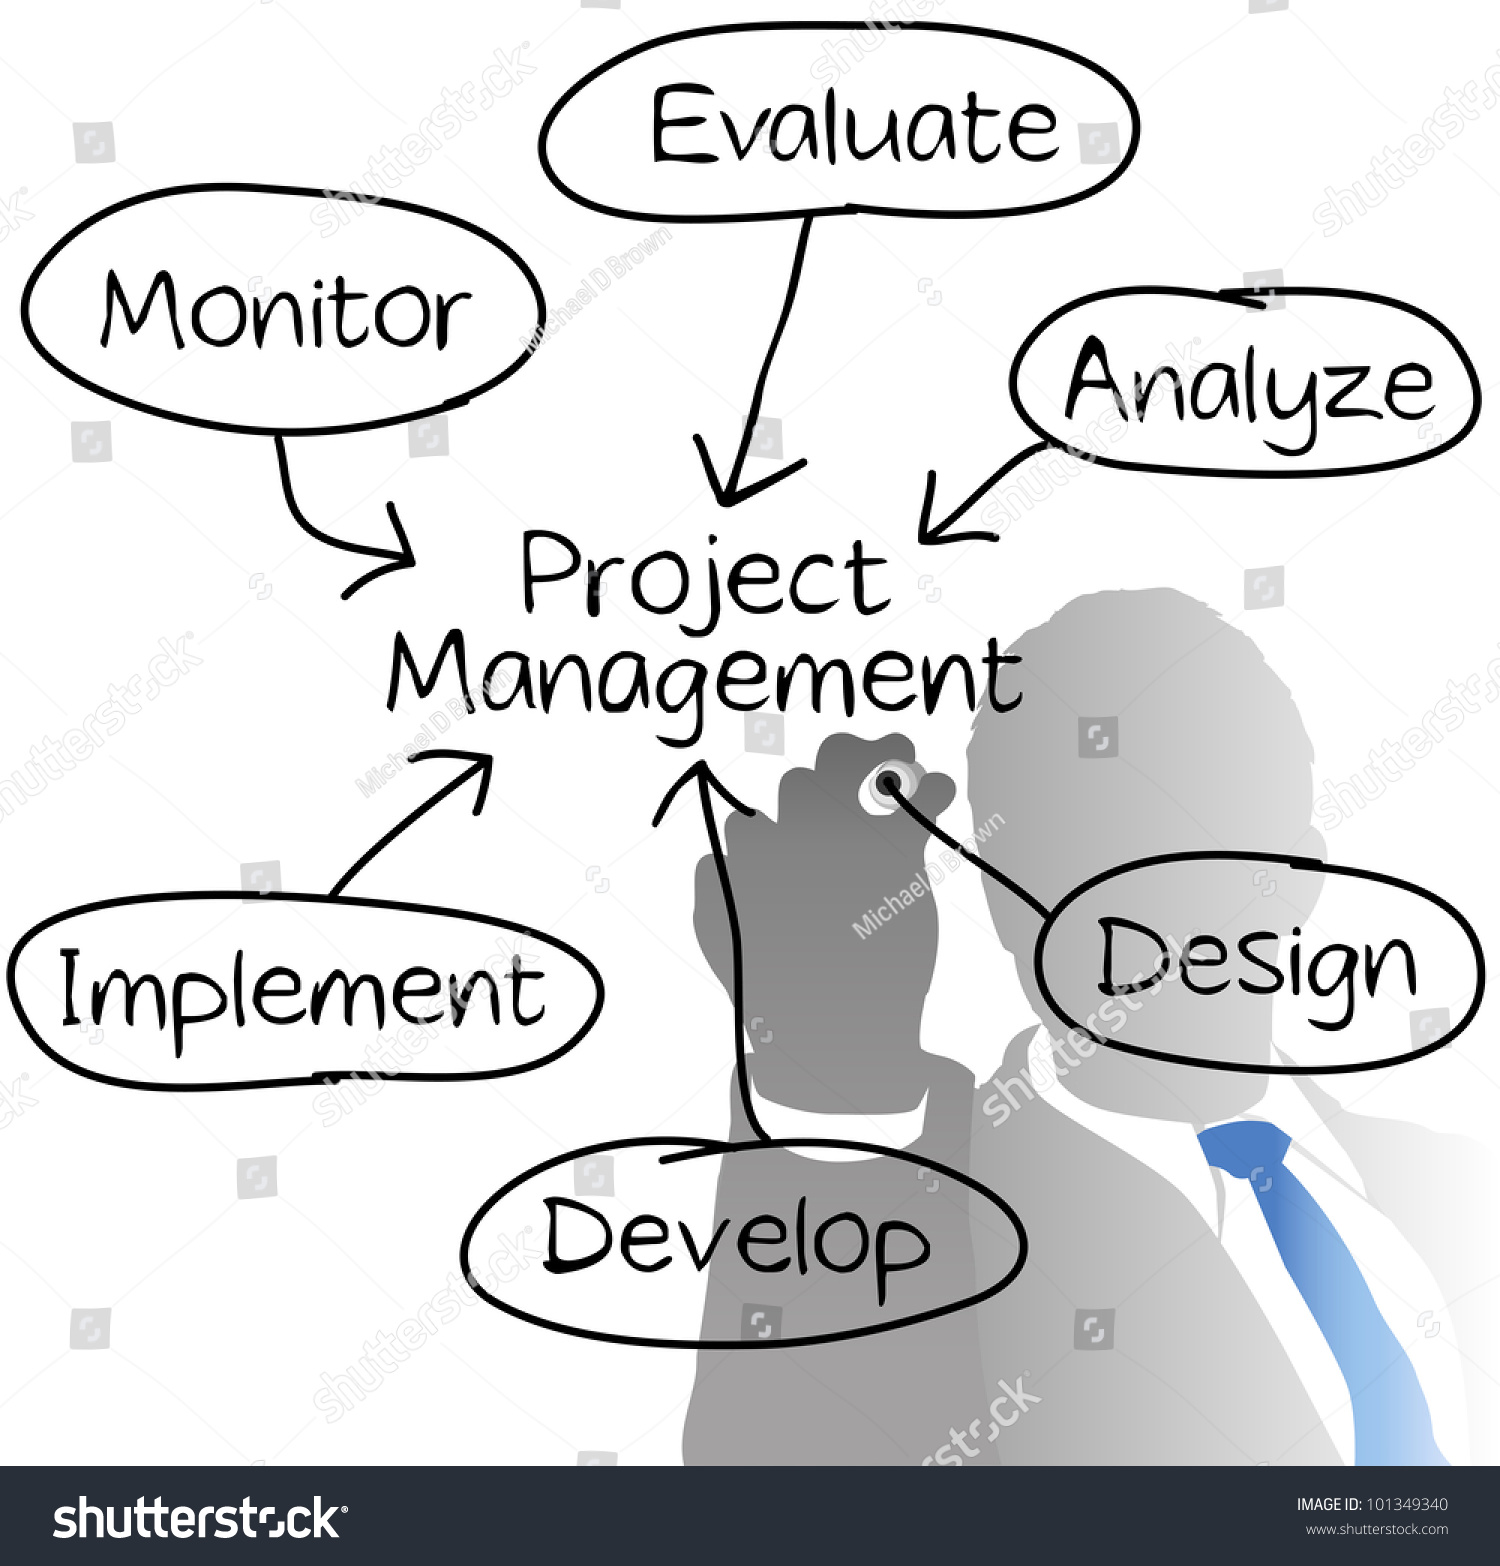 Manager Drawing Project Management Diagram Chart From Behind With